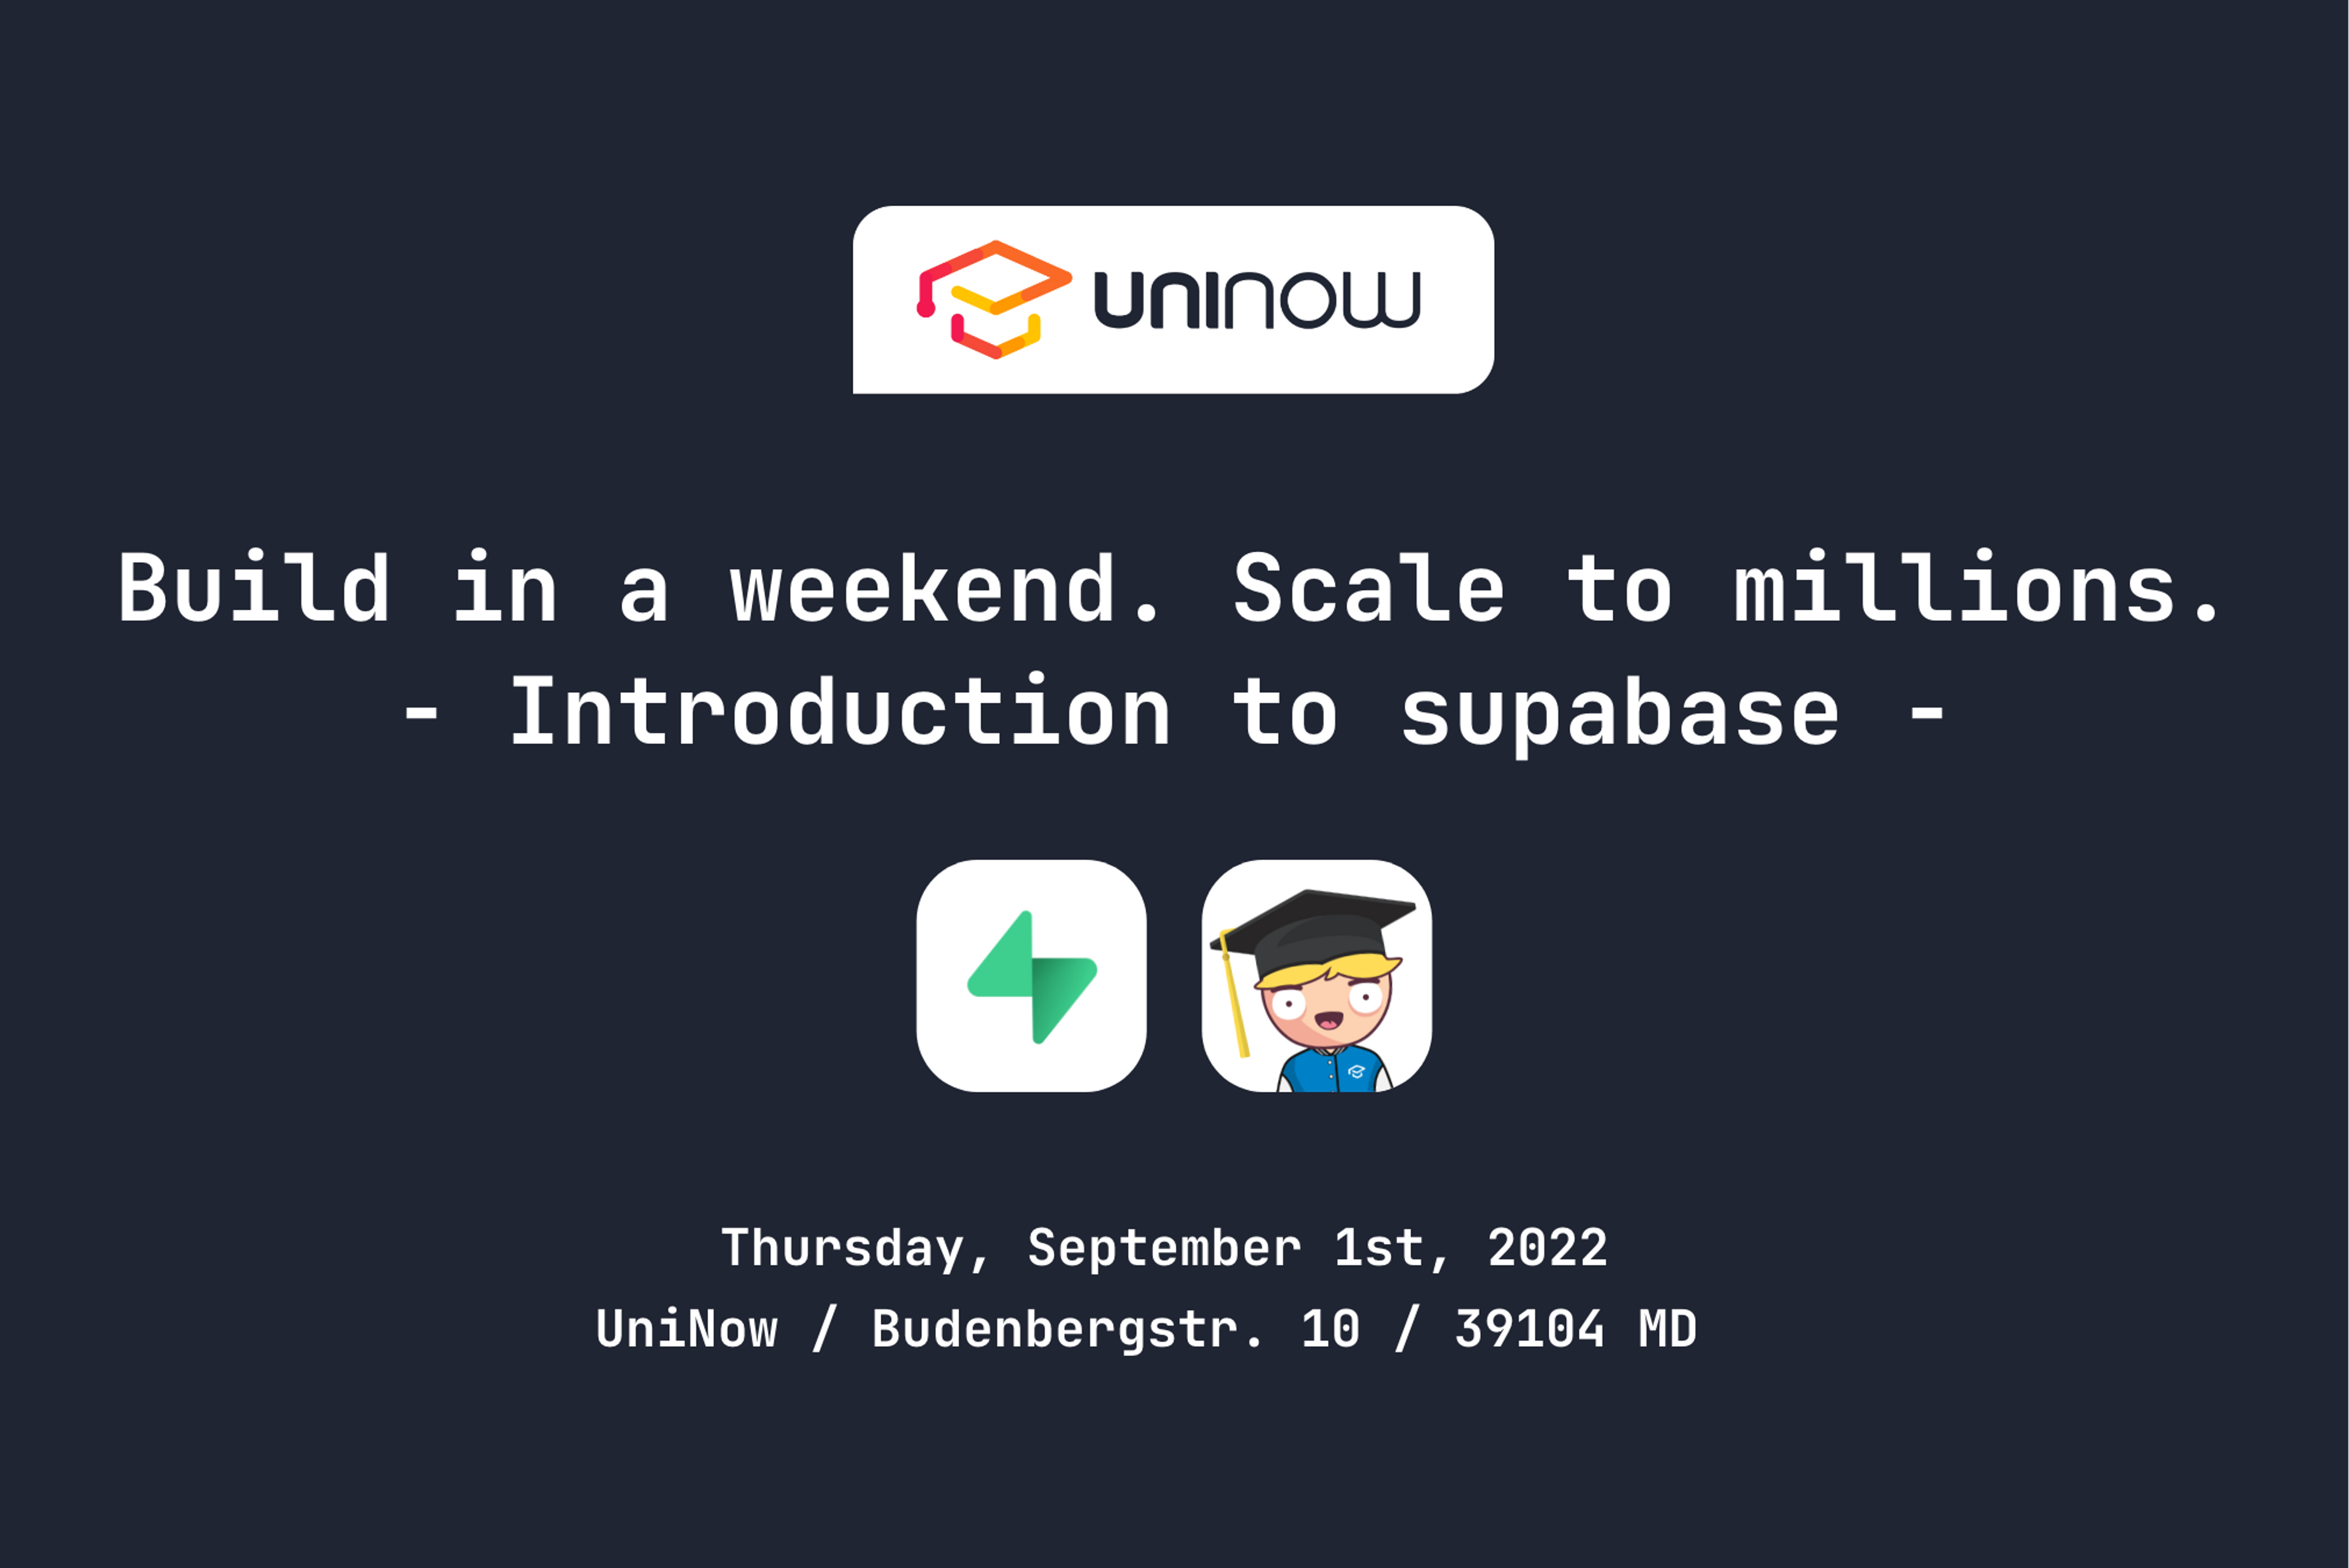 Build in a weekend. Scale to millions - Introduction to supabase